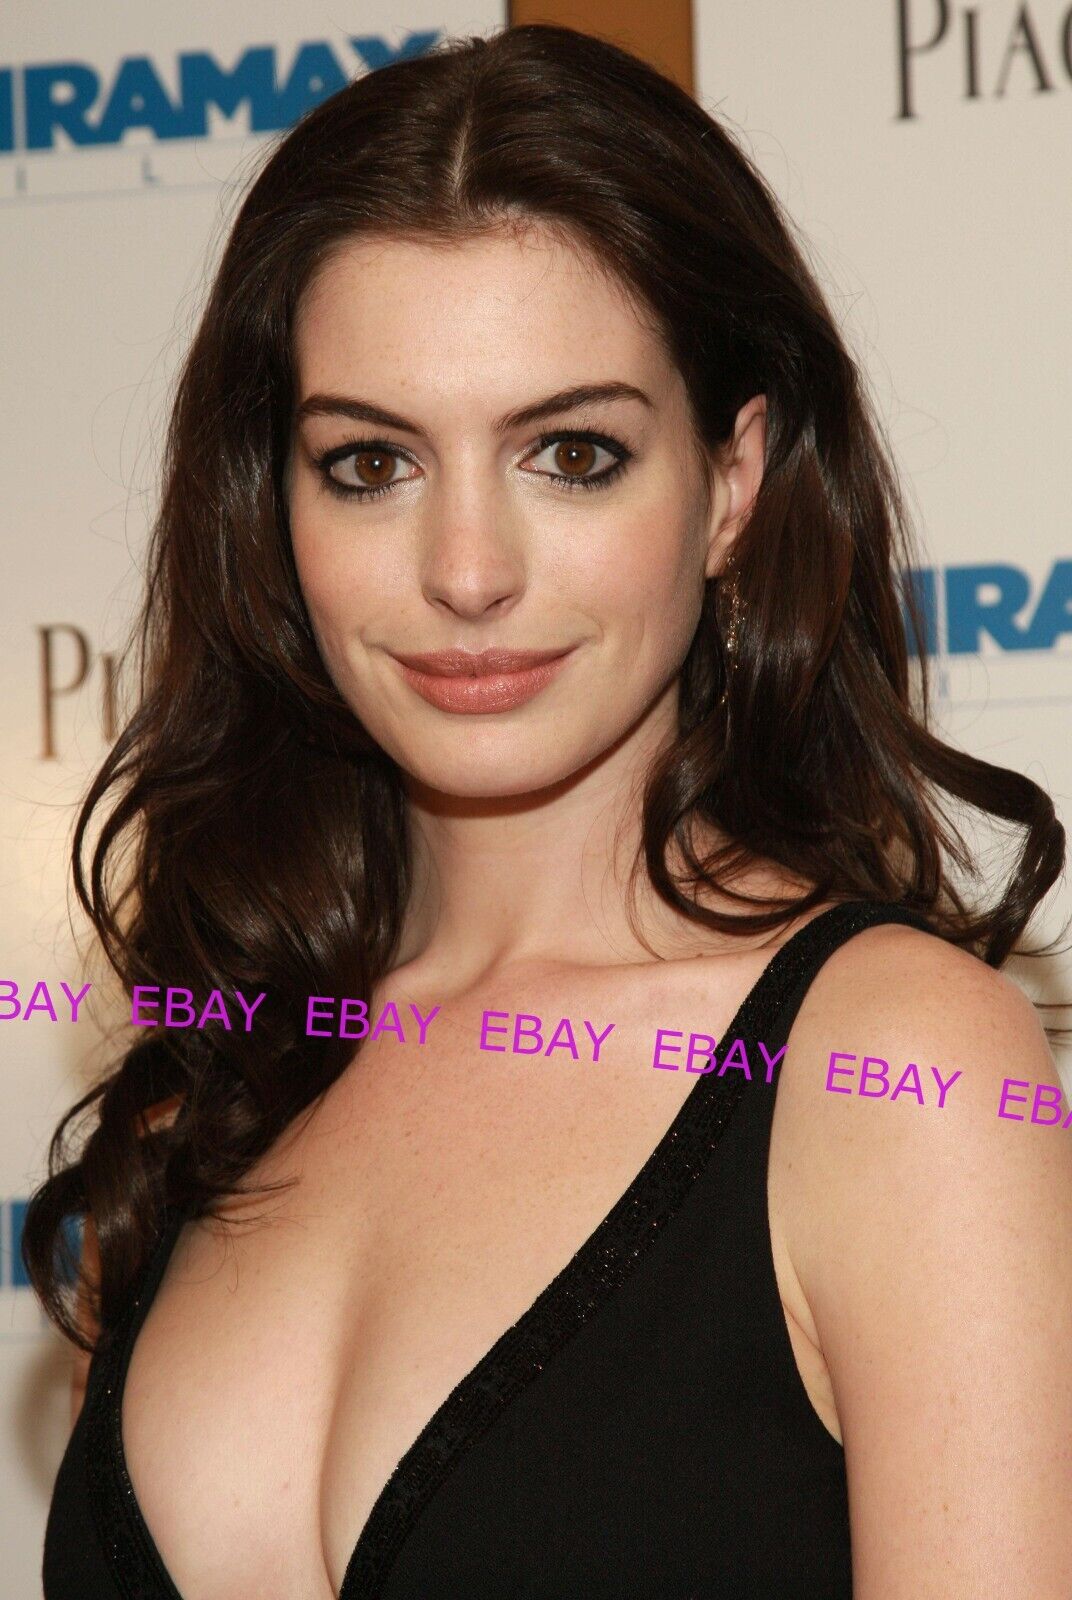 ANNE HATHAWAY picture 🔥 4x6 GLOSSY COLOR PHOTO #7 🔥 sexy & busty actress model